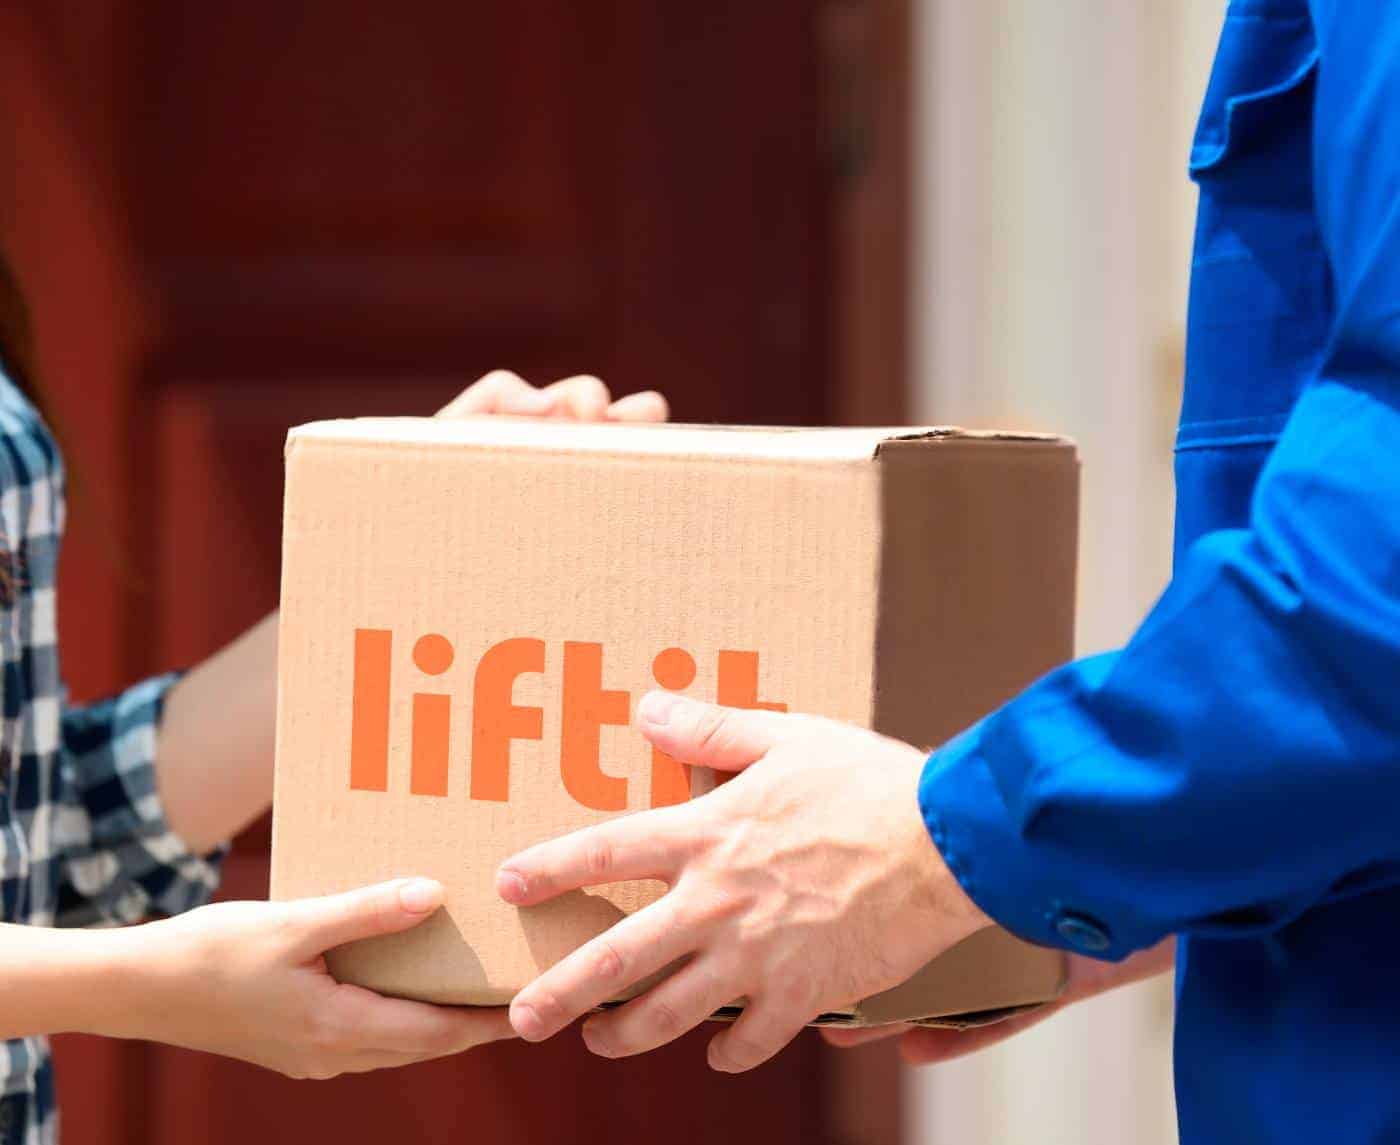 colombian logistics startup, liftit, raises us$14.3 million from monashees and the ifc